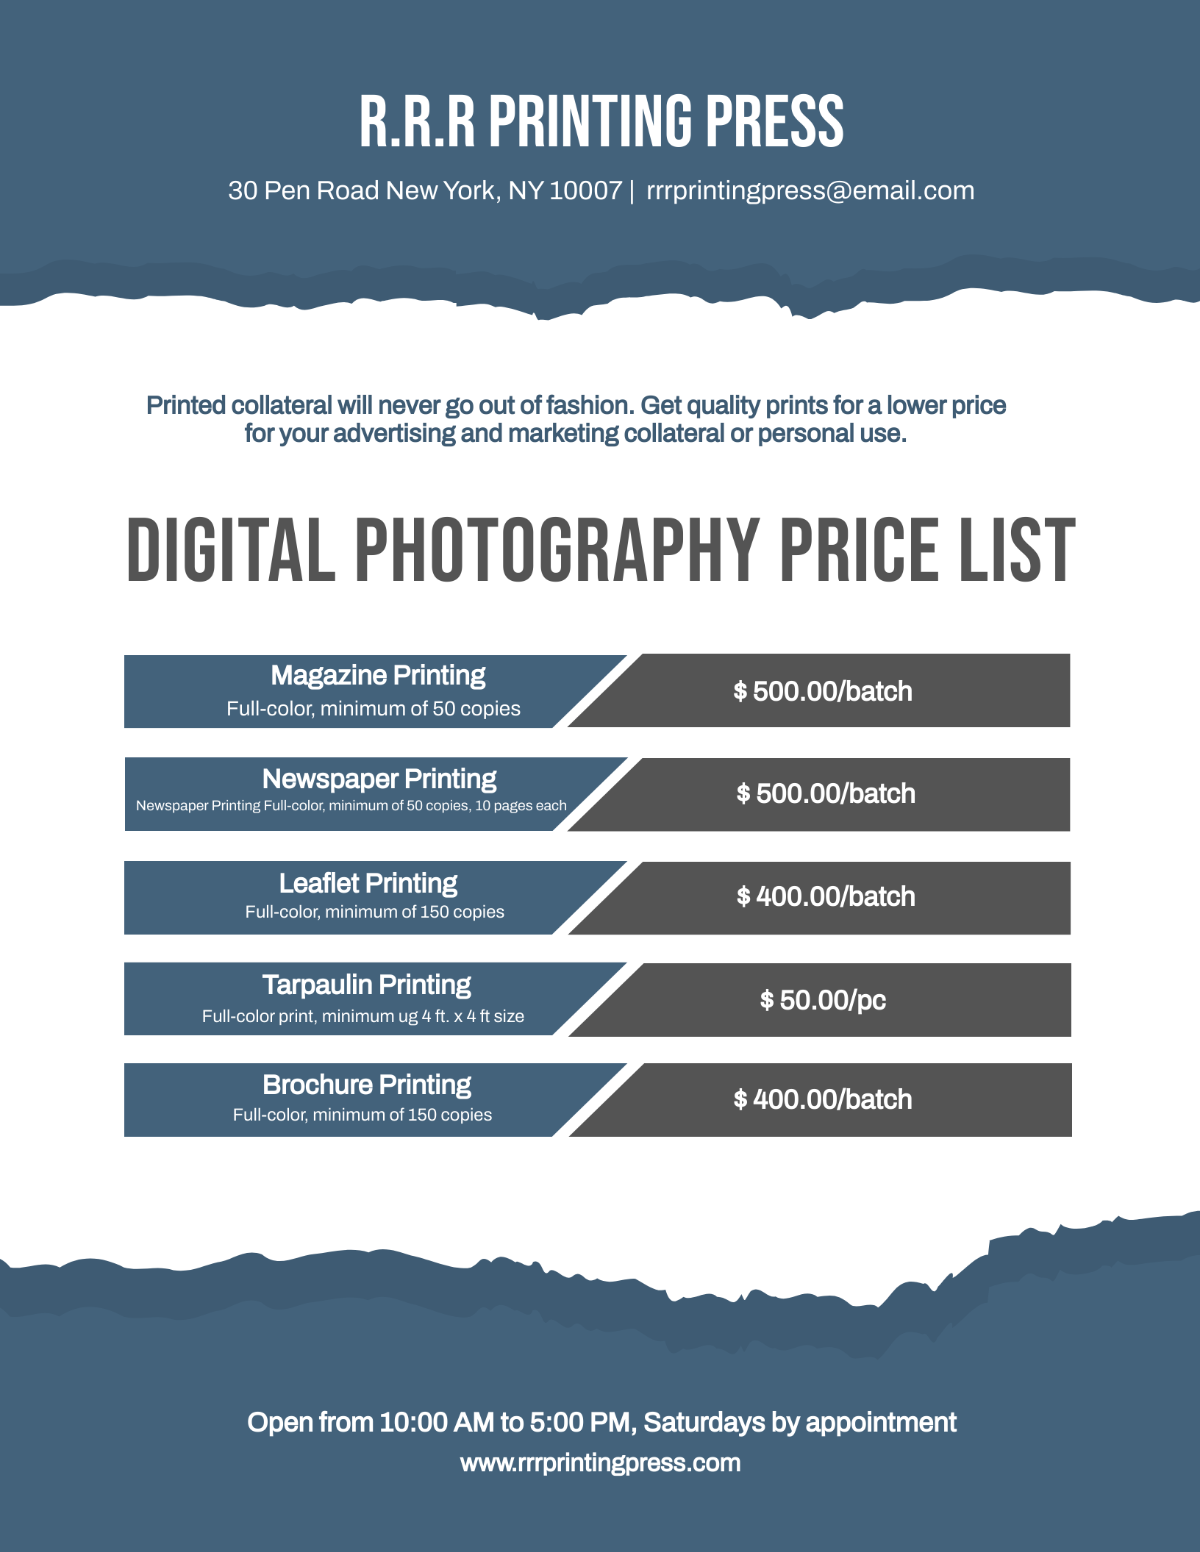 Services & Pricing Guide Template